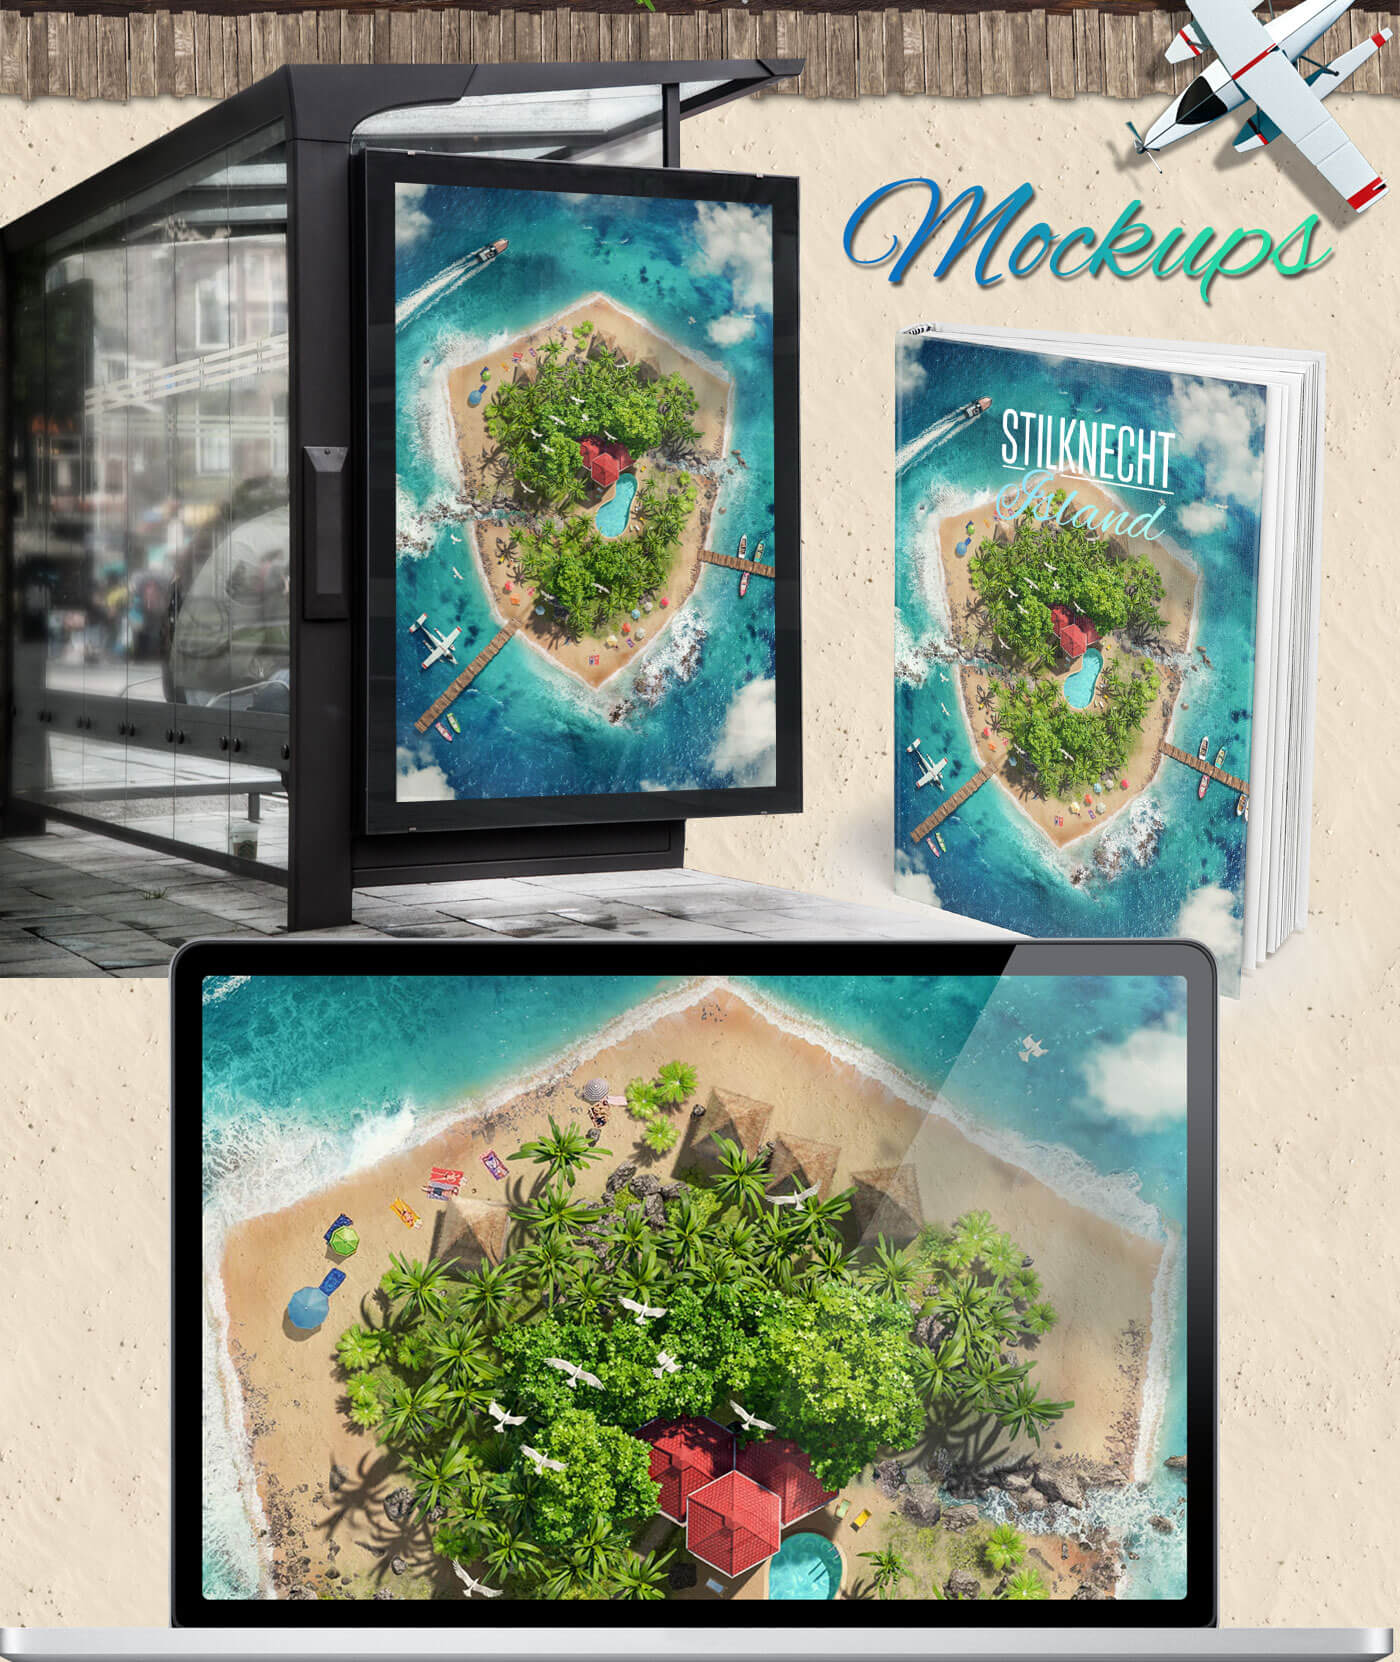 #4 Mockups - Island "Stiknecht" Visualization of an Island in the shape of my logo. 3D and Photo-Artwork by ruediger lauktien 2018 200 best digital artists